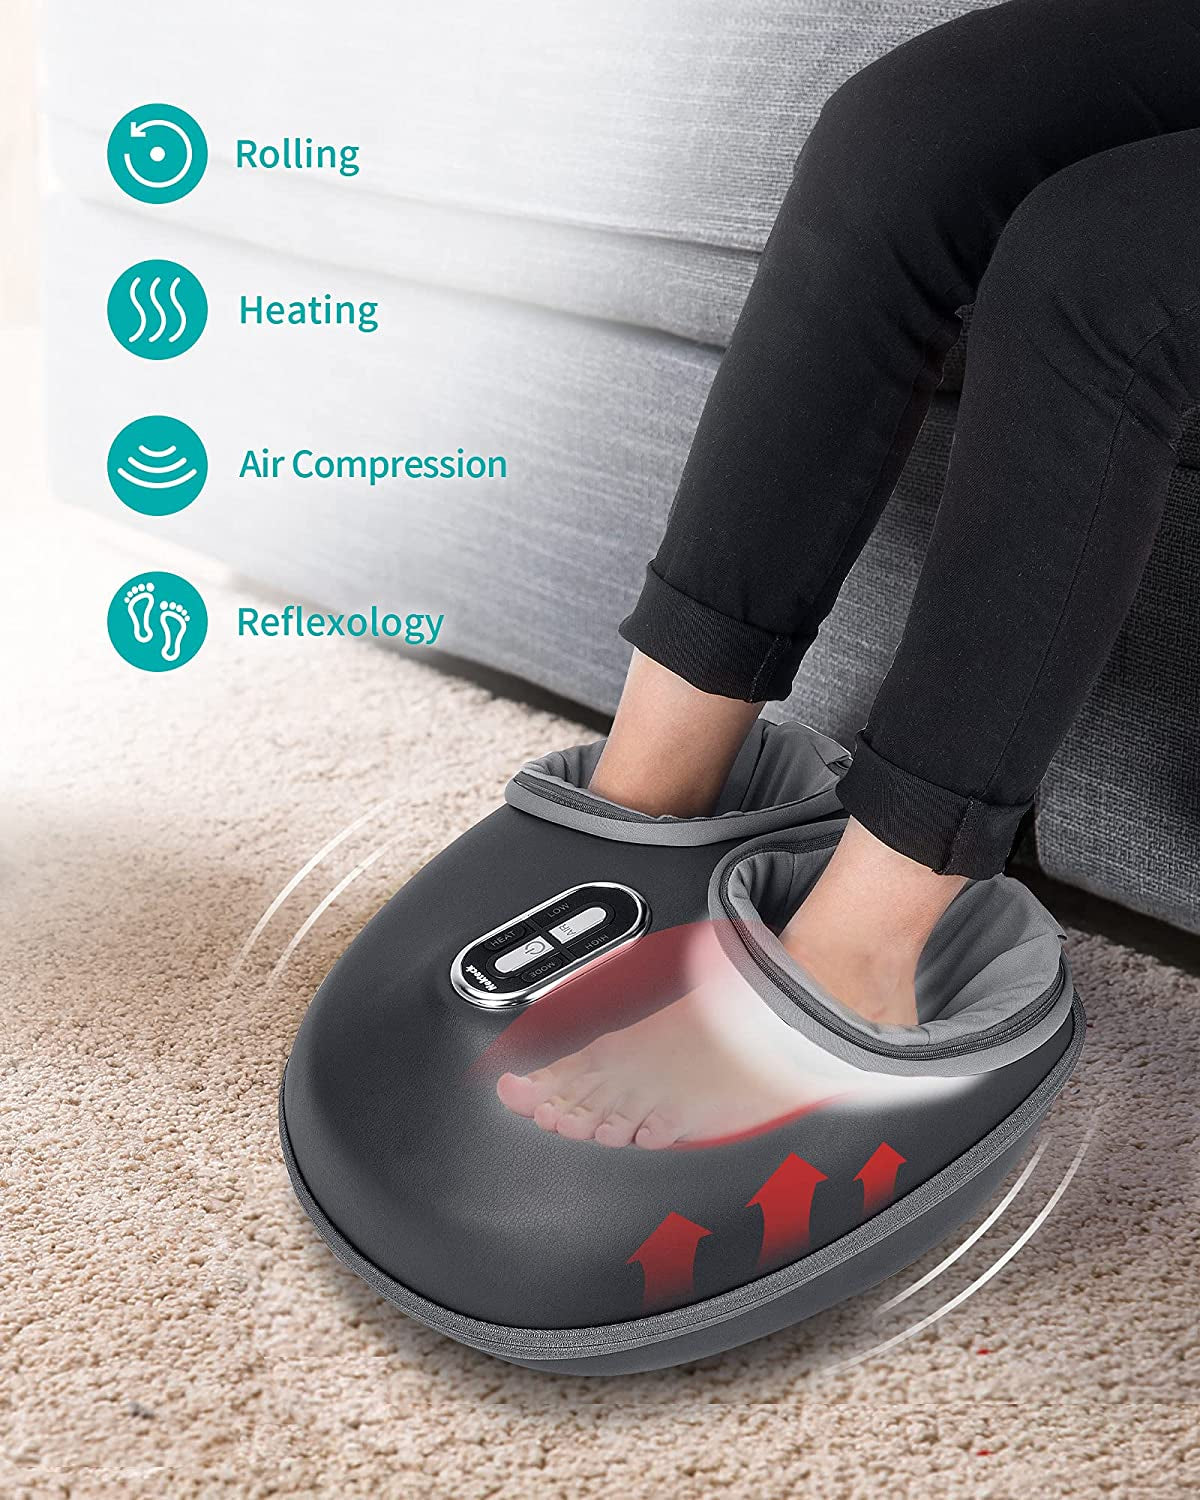 Shiatsu Foot Massager Machine with Soothing Heat, Deep Kneading Therapy, Air Compression, Improve Blood Circulation and Foot Wellness,Relax for Home or Office Use(Gray)